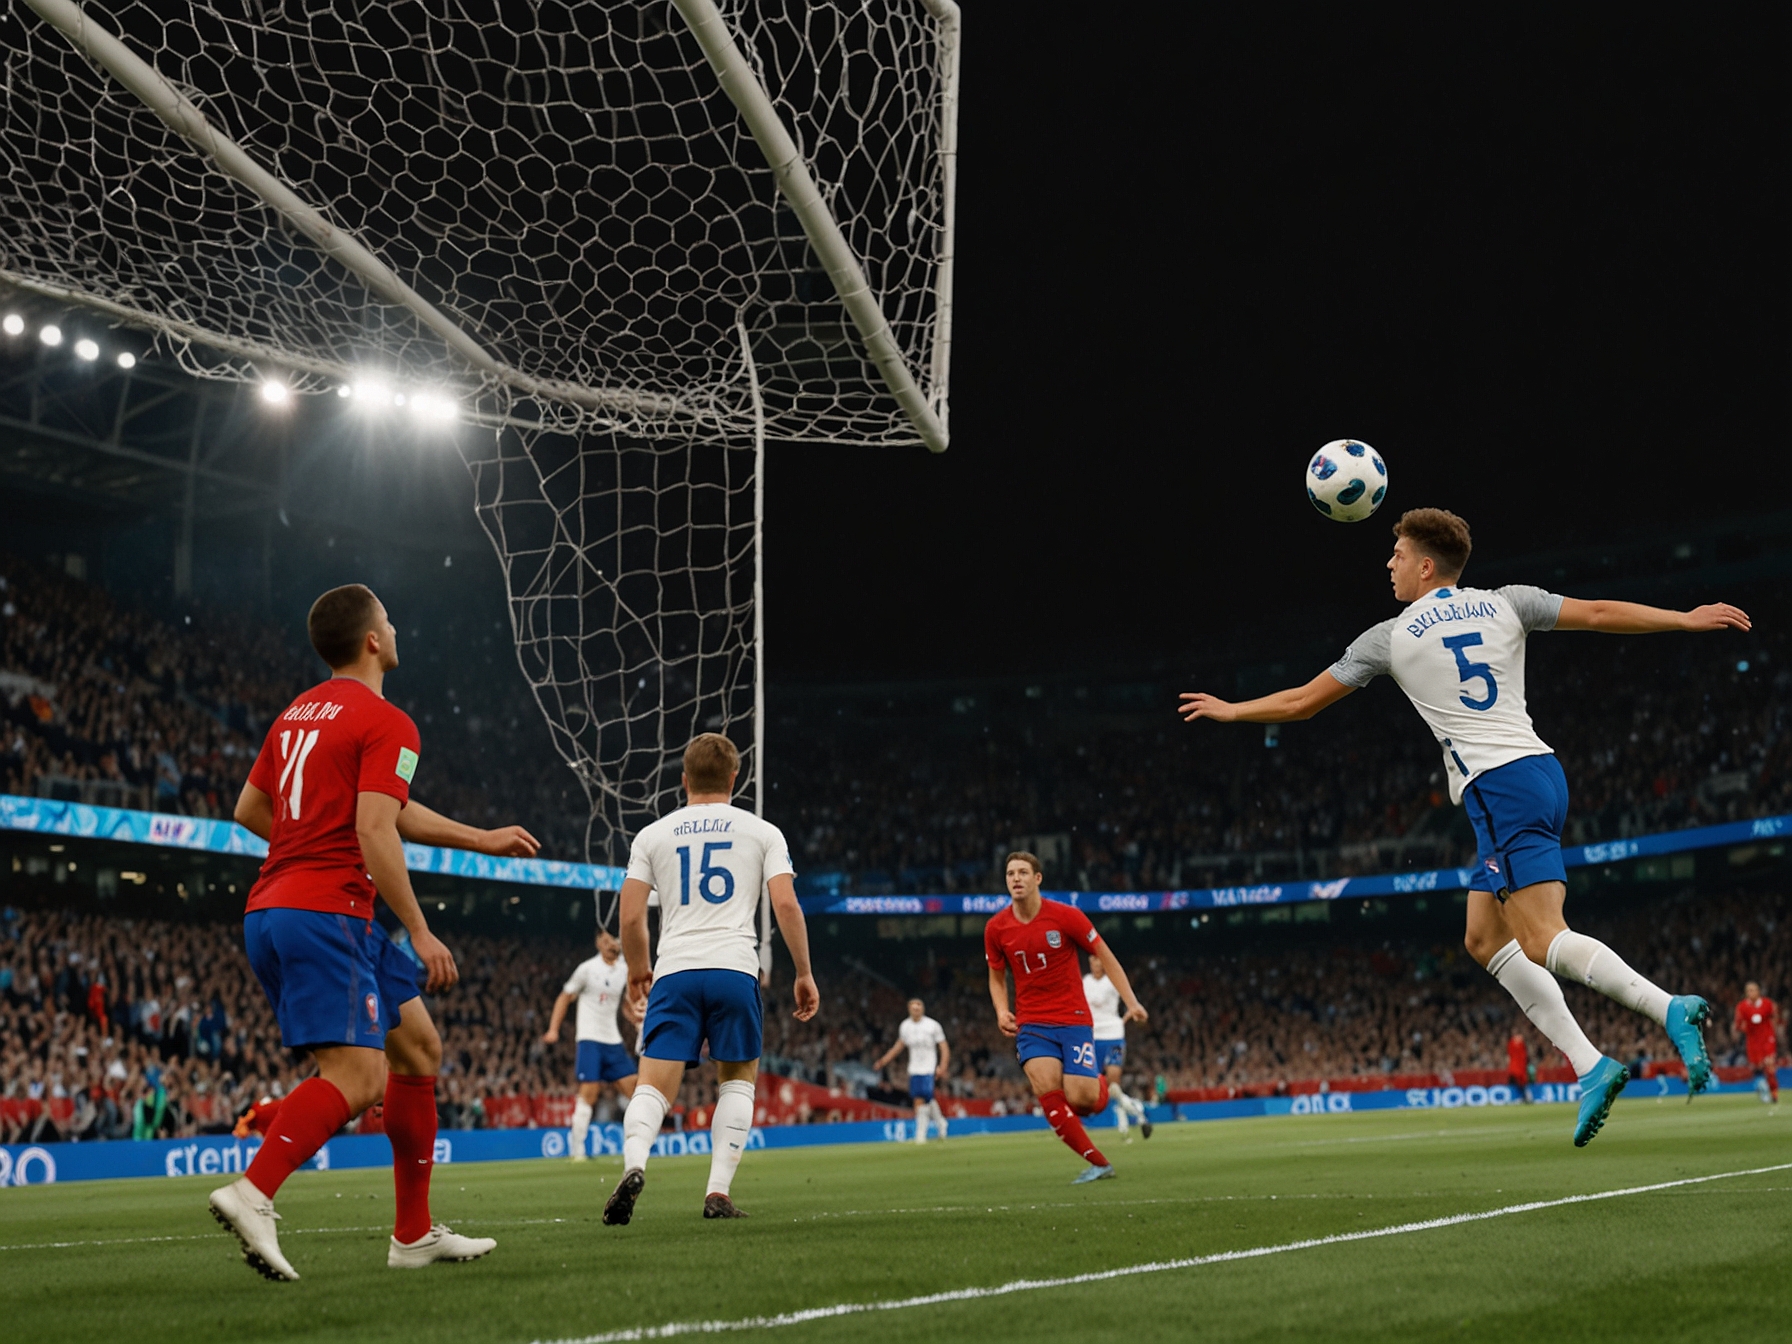 Jude Bellingham heading the ball into the net to give England an early lead against Serbia in their Euro 2024 Group C opener in Gelsenkirchen.